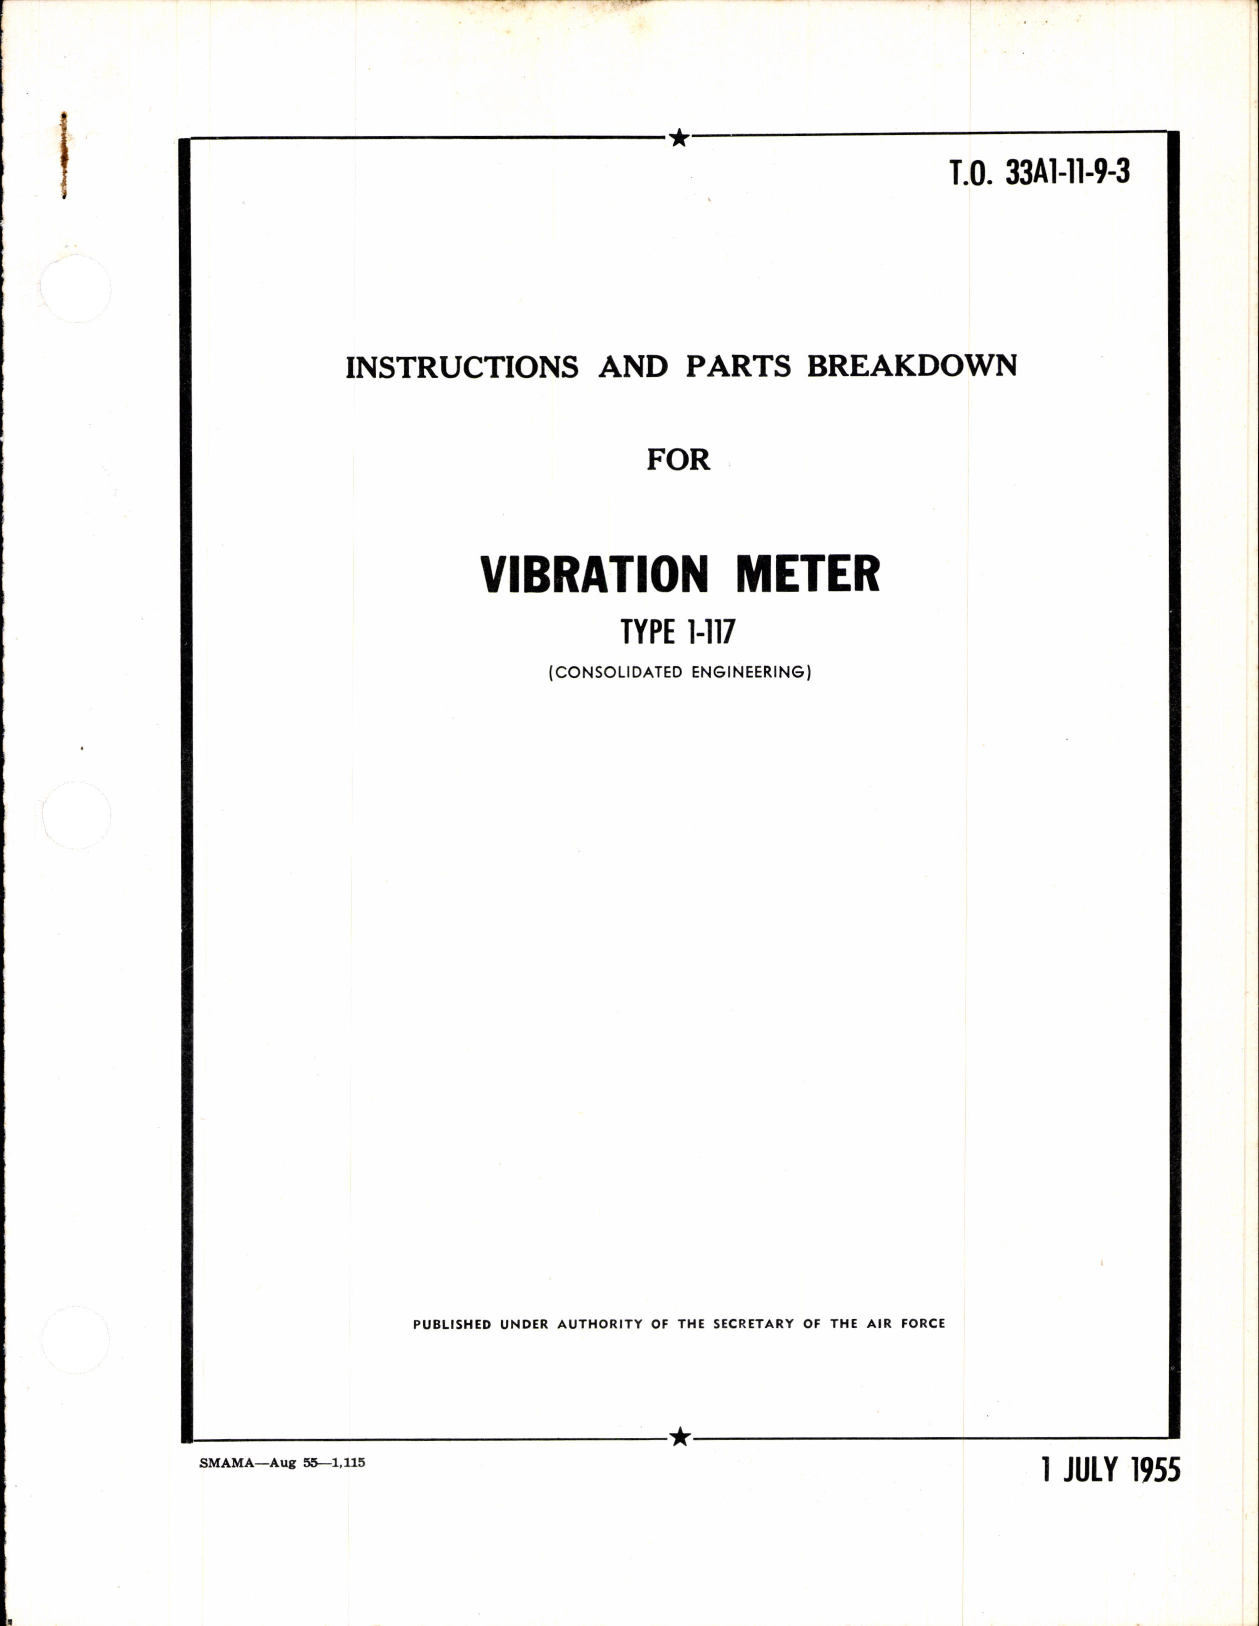 Sample page 1 from AirCorps Library document: Instructions & Parts Breakdown for Vibration Meter Type 1-117